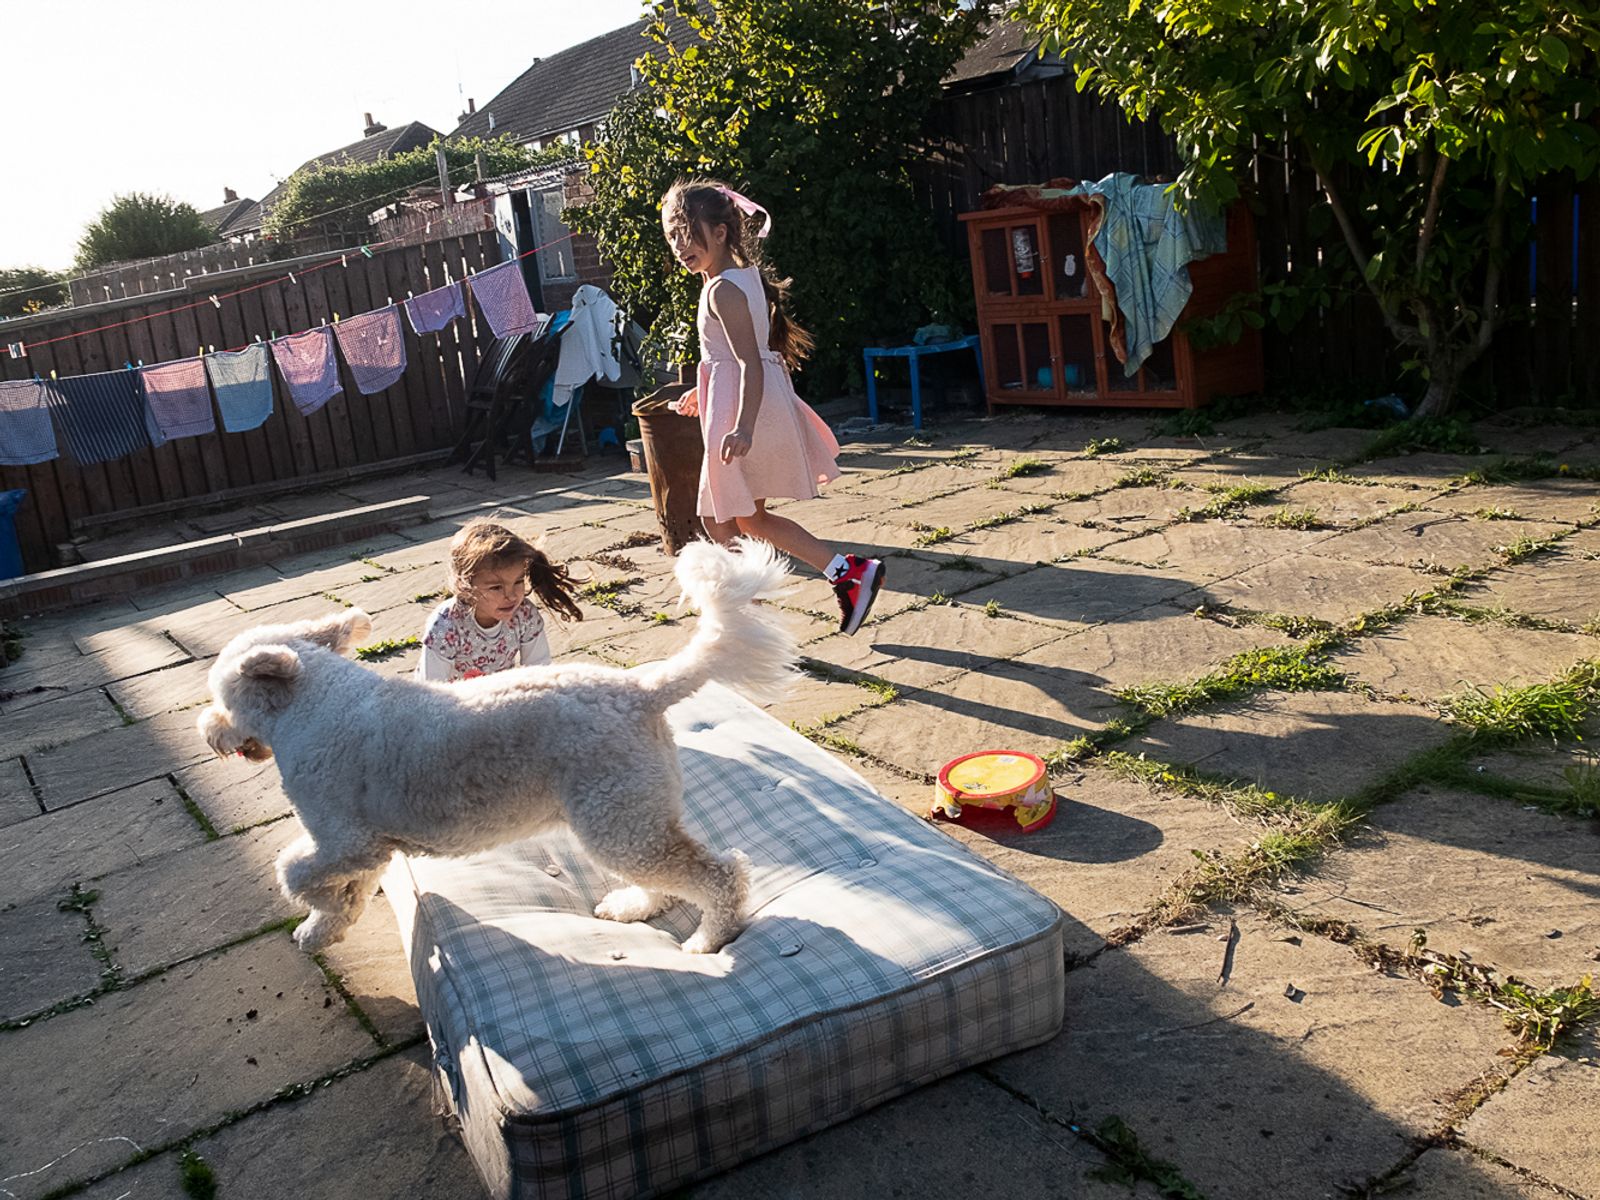 © Rich Wiles - Photo by Ruba al-Hindawi. Hanan (centre) and Rayan (centre left) playing with a dog in their neighbour's back garden.